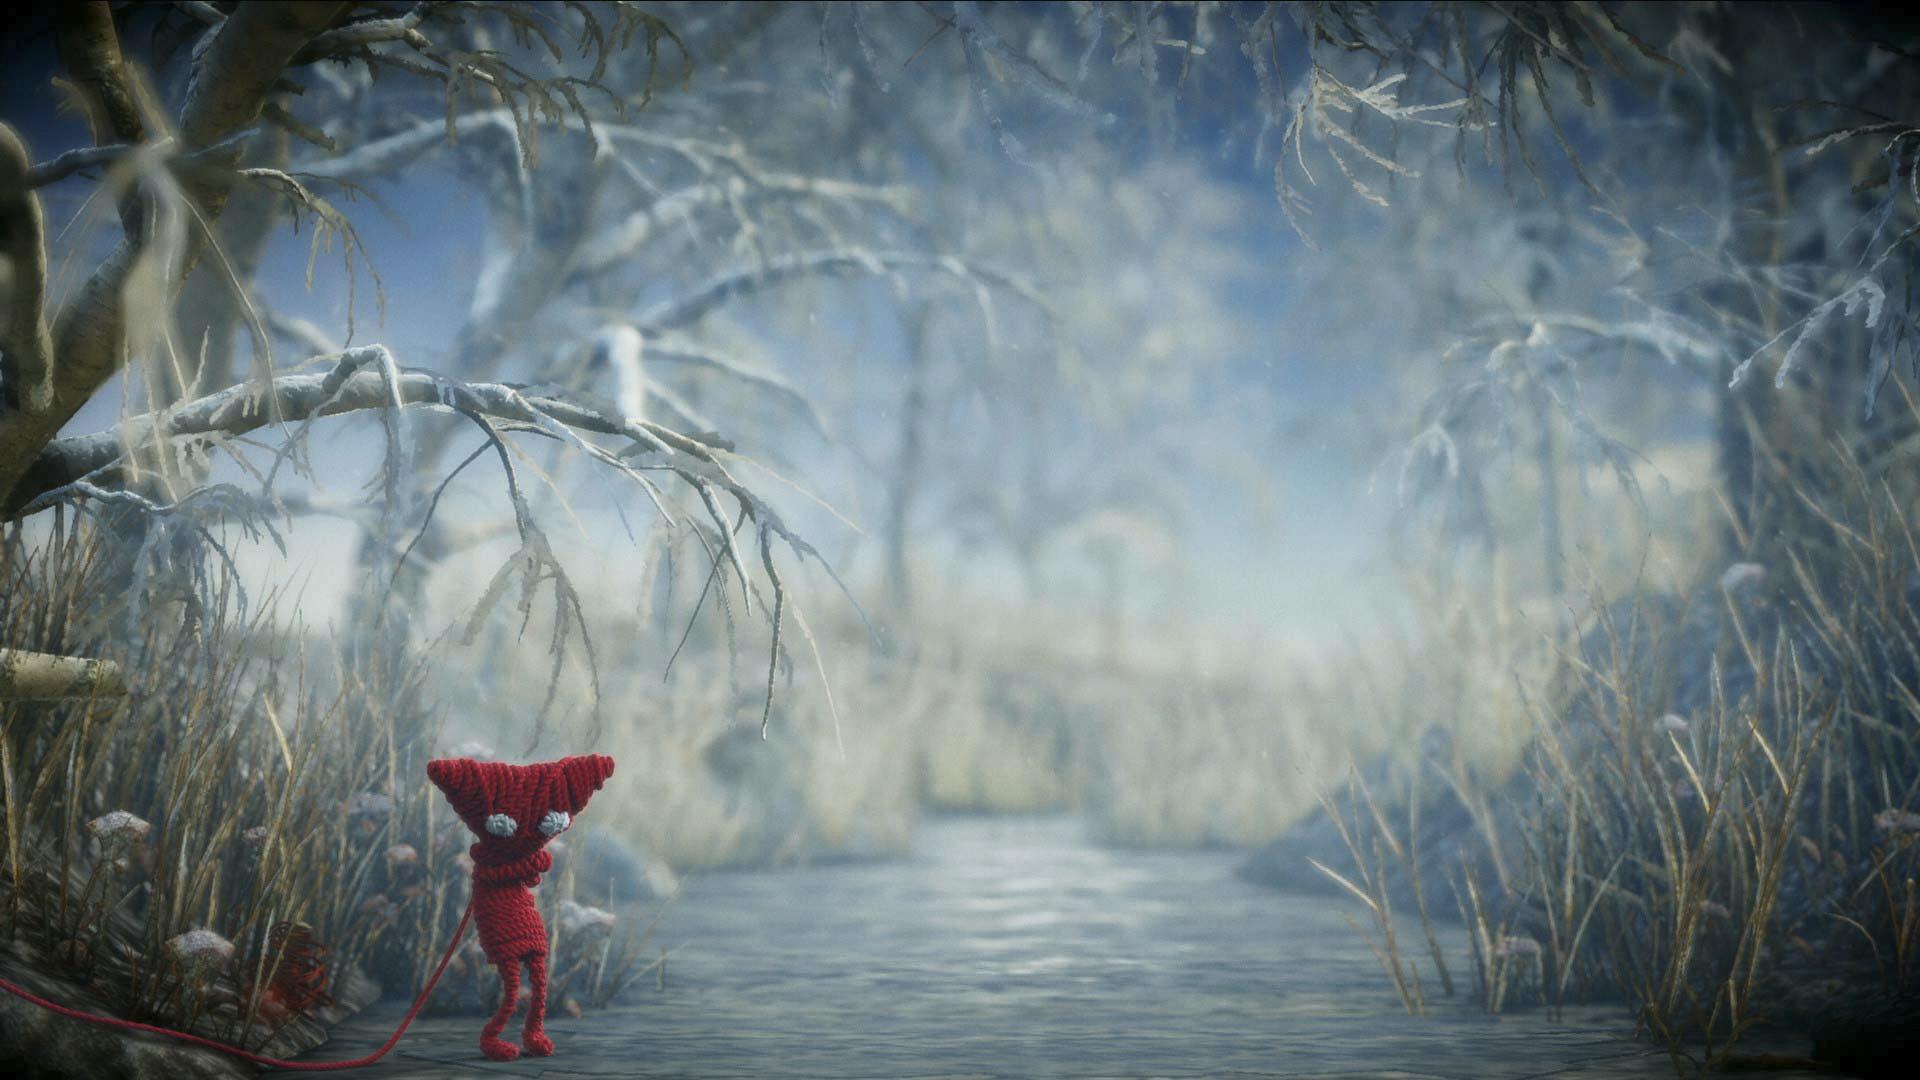 Video game Unravel explores the ties that bind and